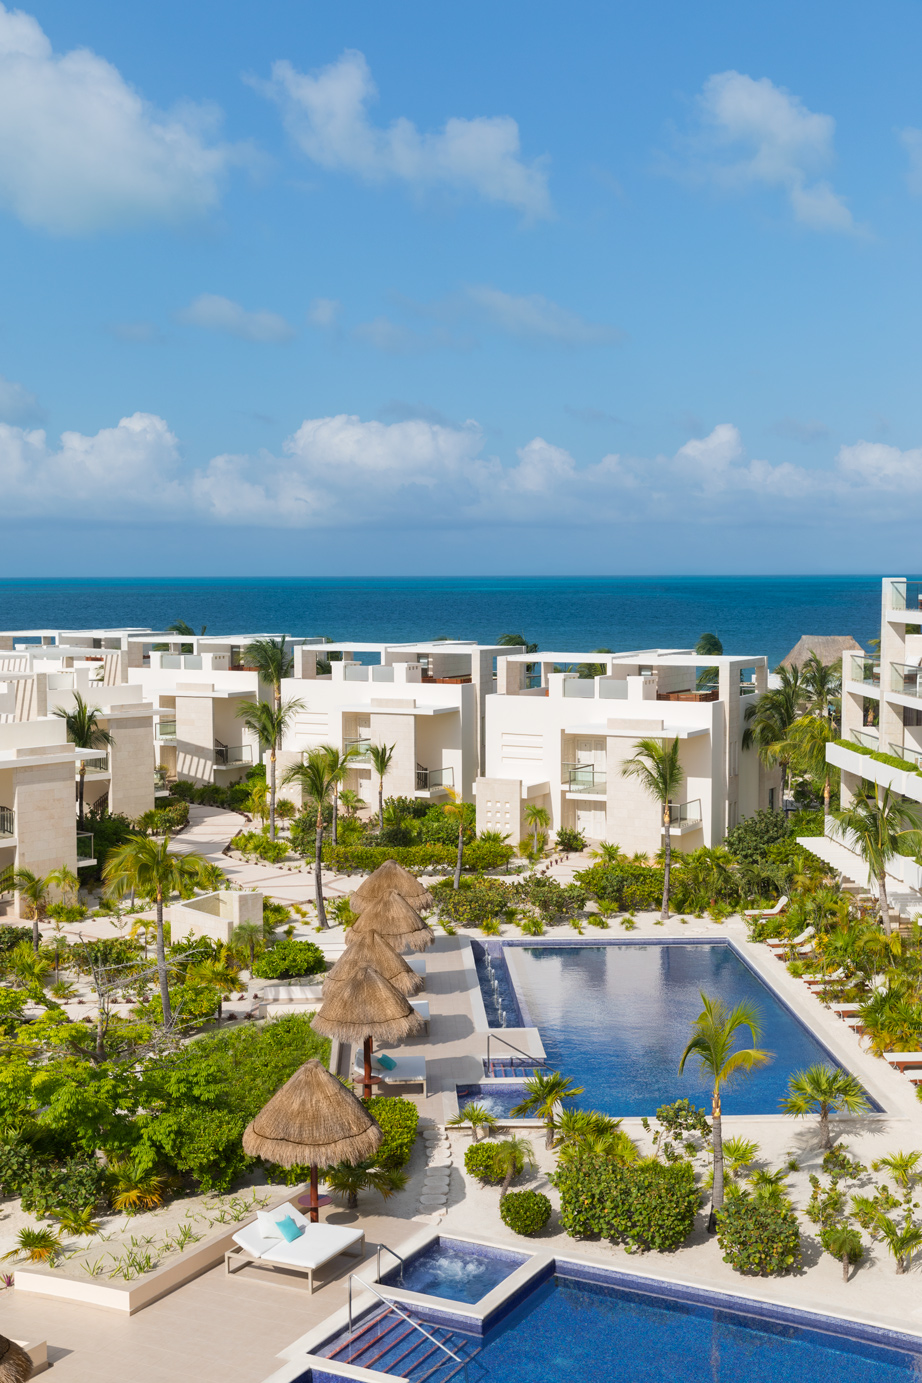 Beloved Playa Mujeres: One of the best luxury hotels in Cancun